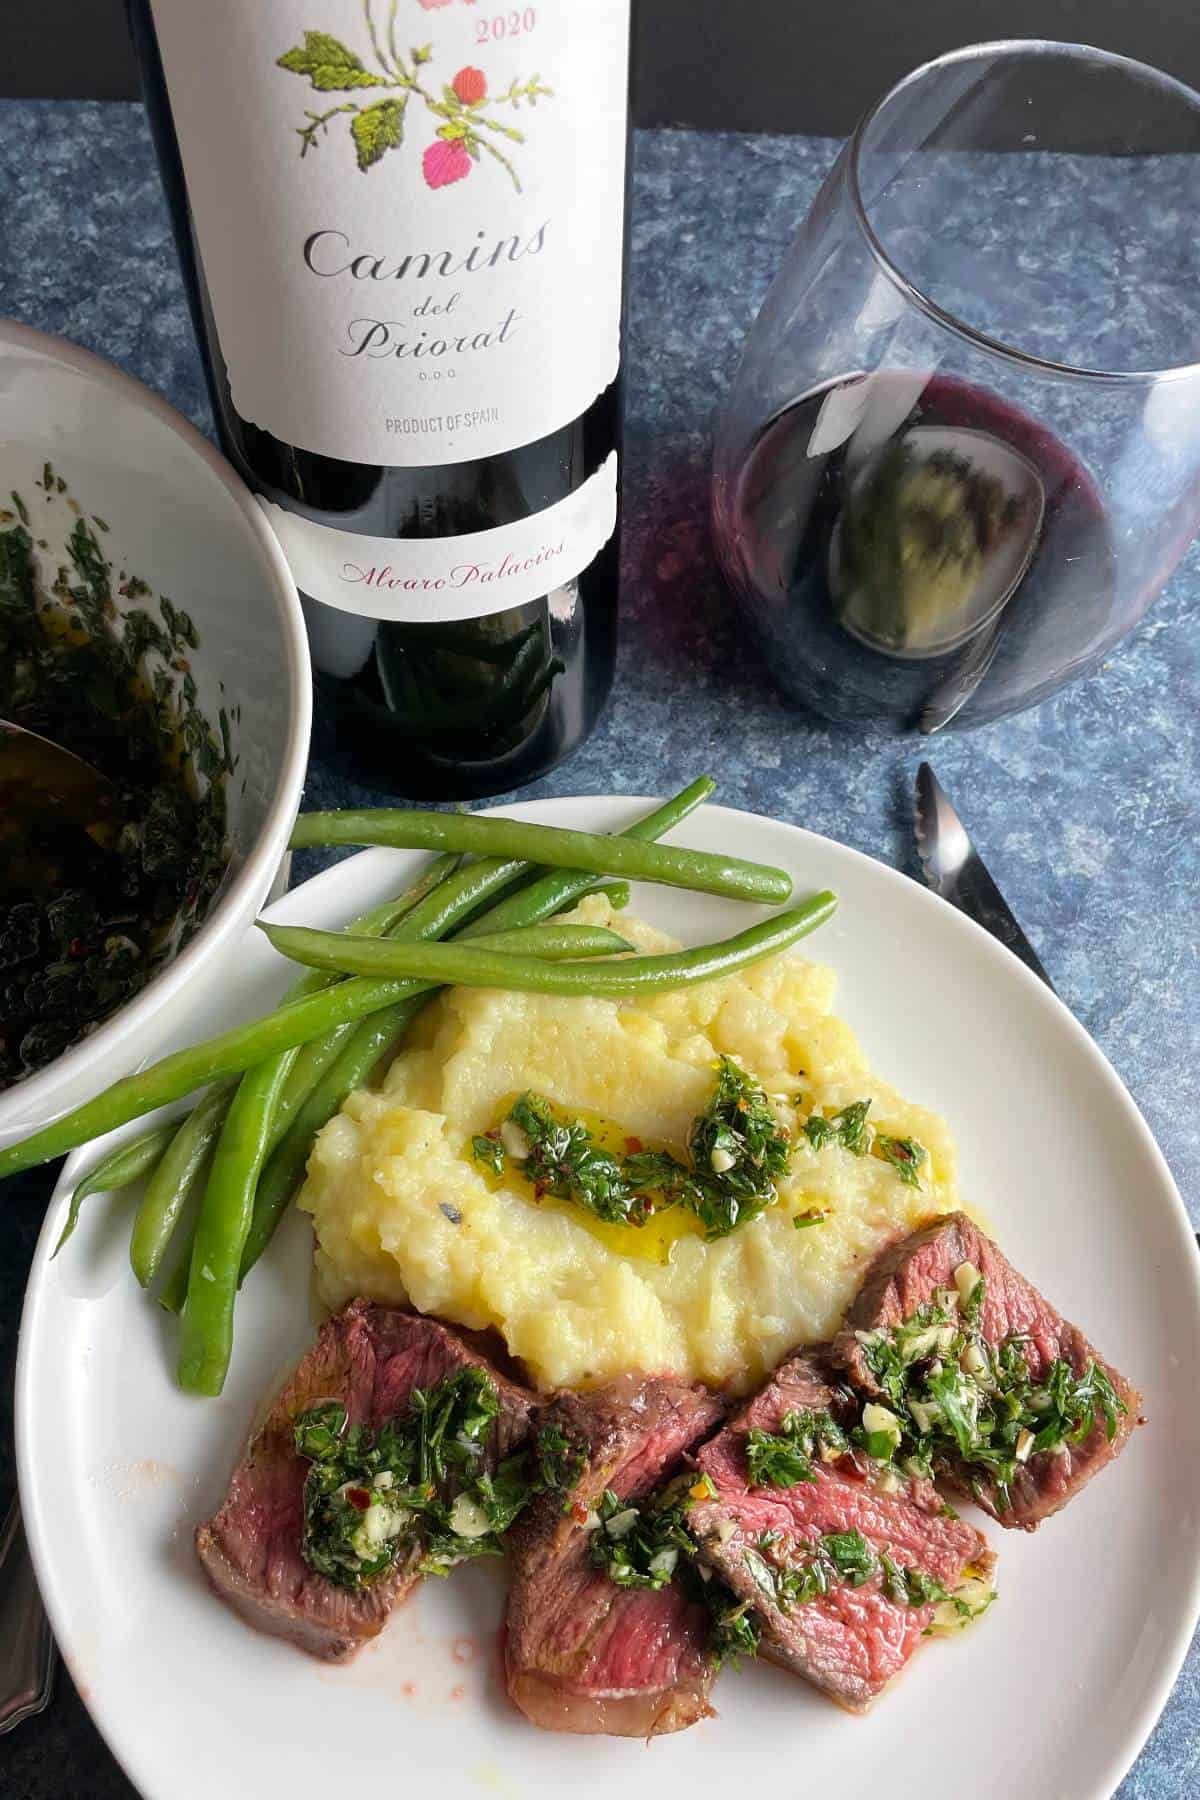 slices of steak topped with chimichurri, served with mashed potatoes and green beans along with Spanish red wine.